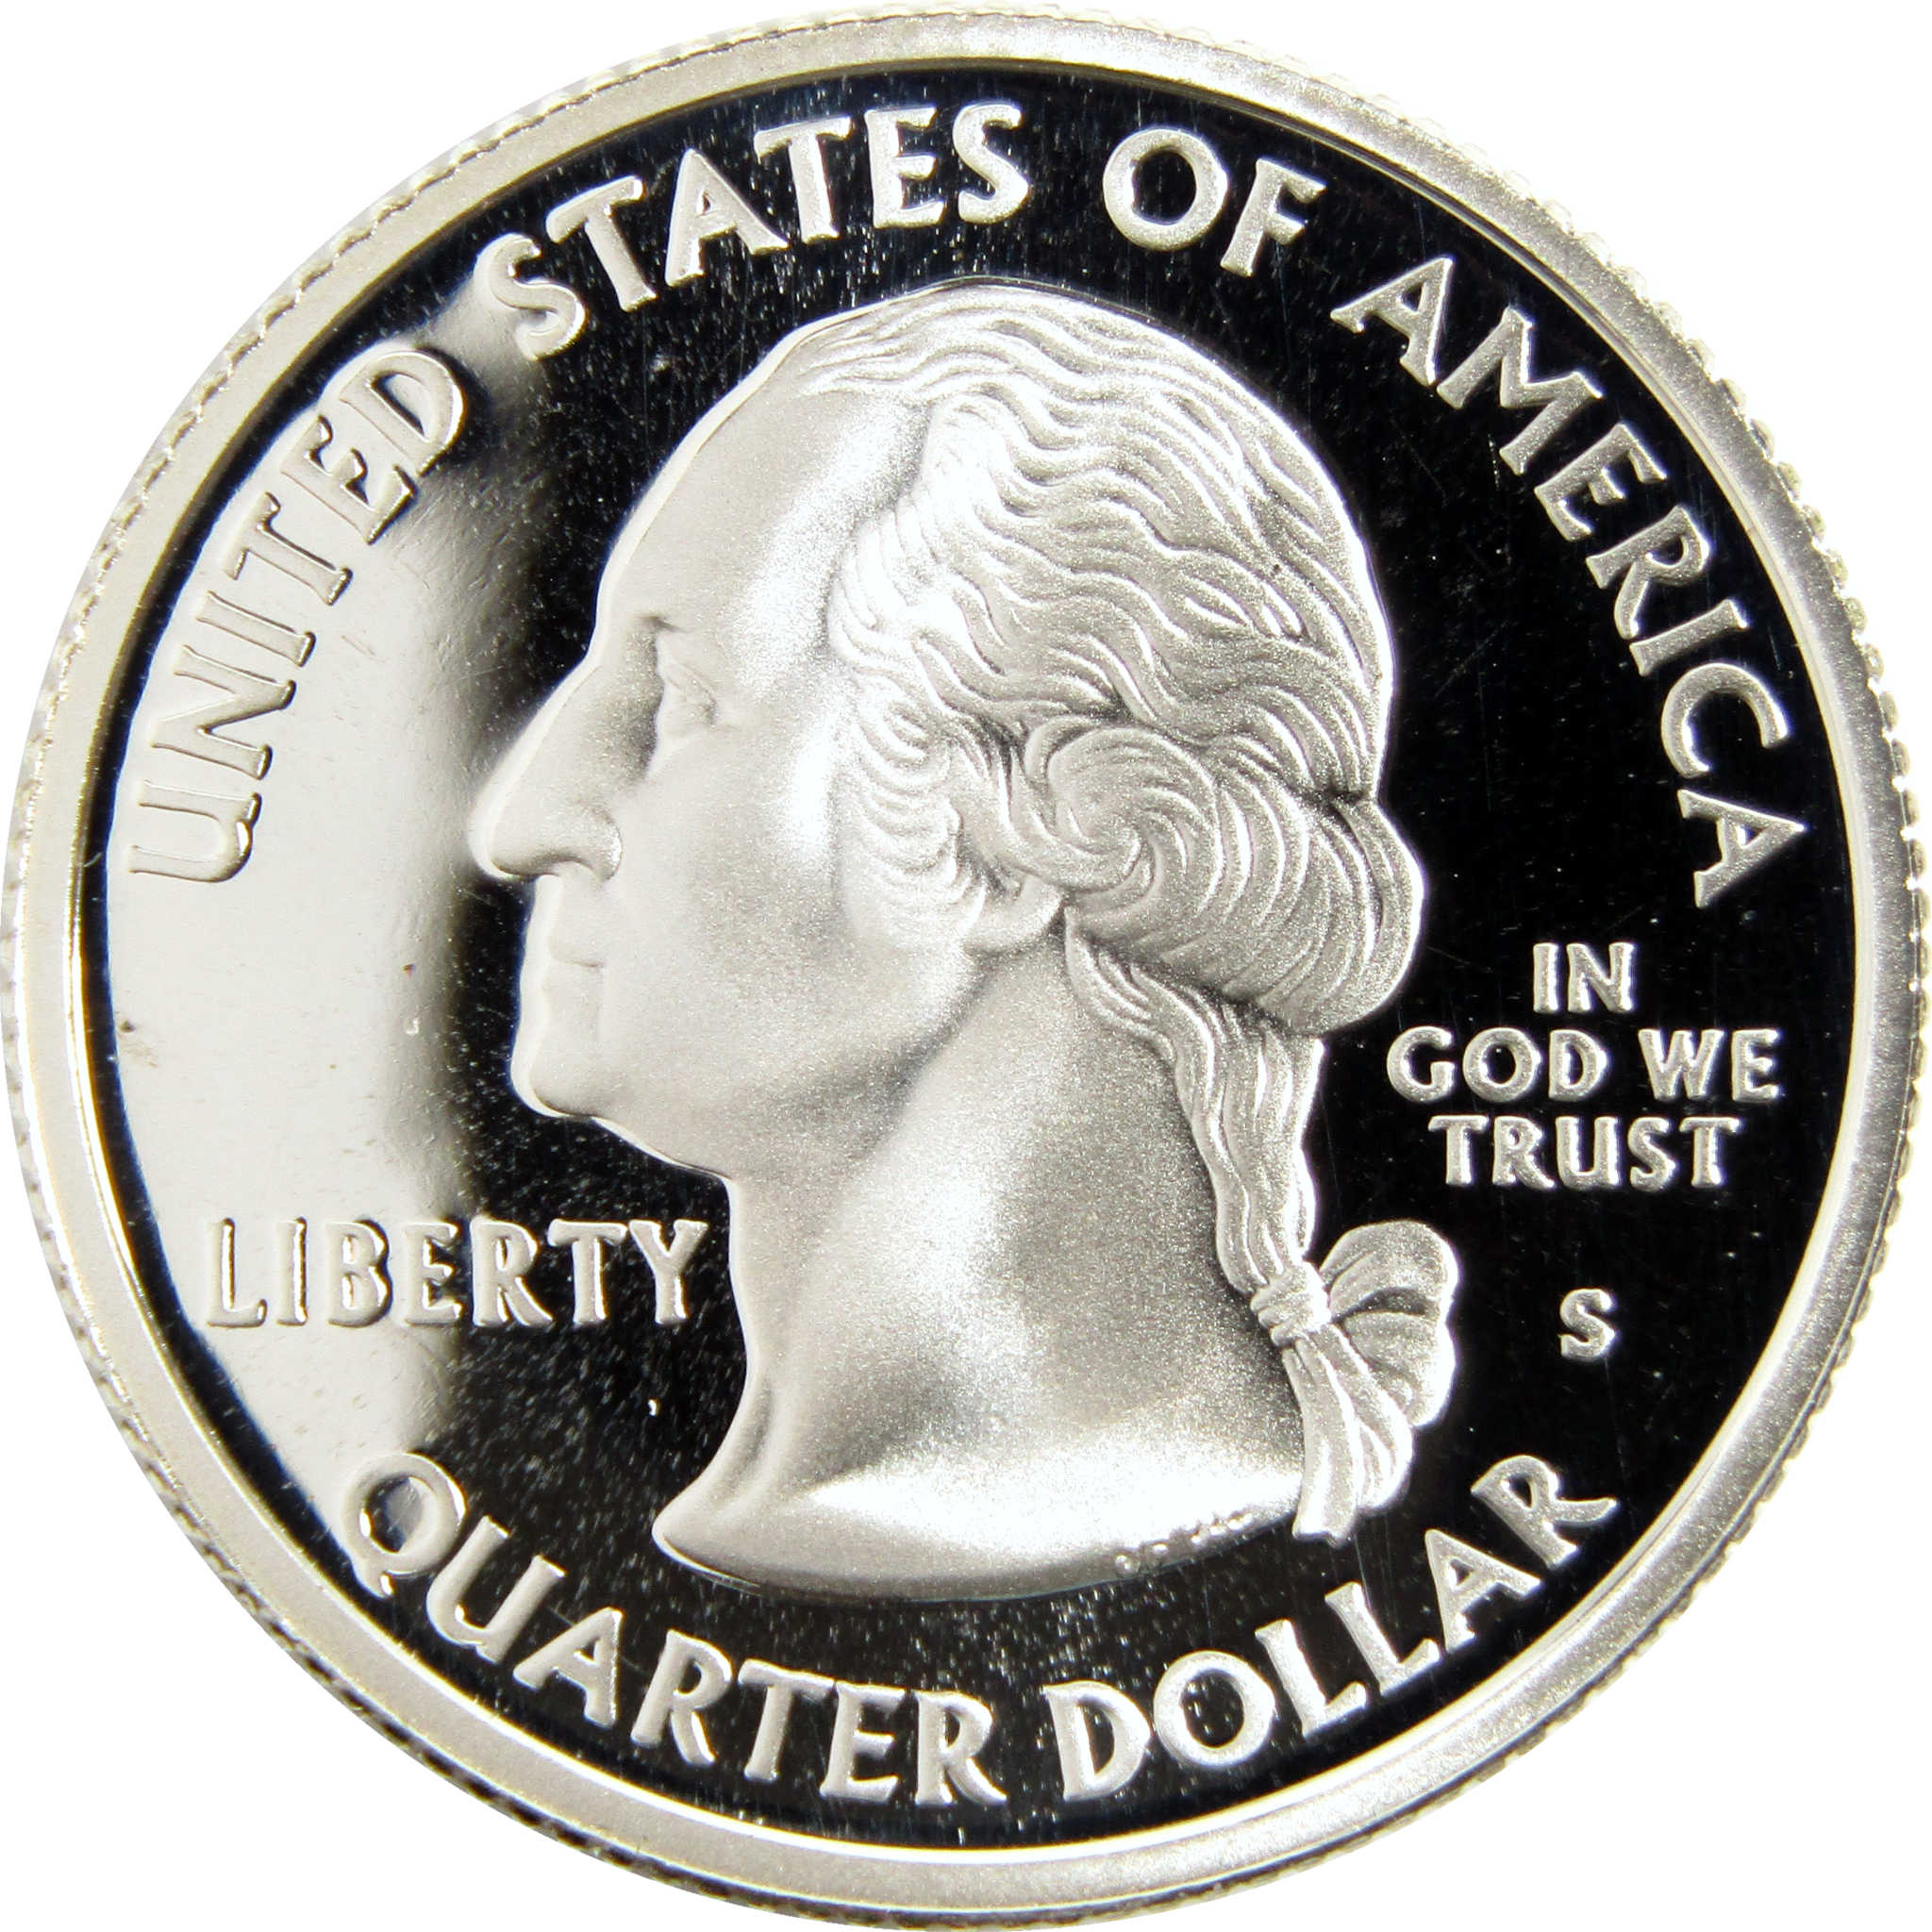 2008 S Oklahoma State Quarter Silver 25c Proof Coin